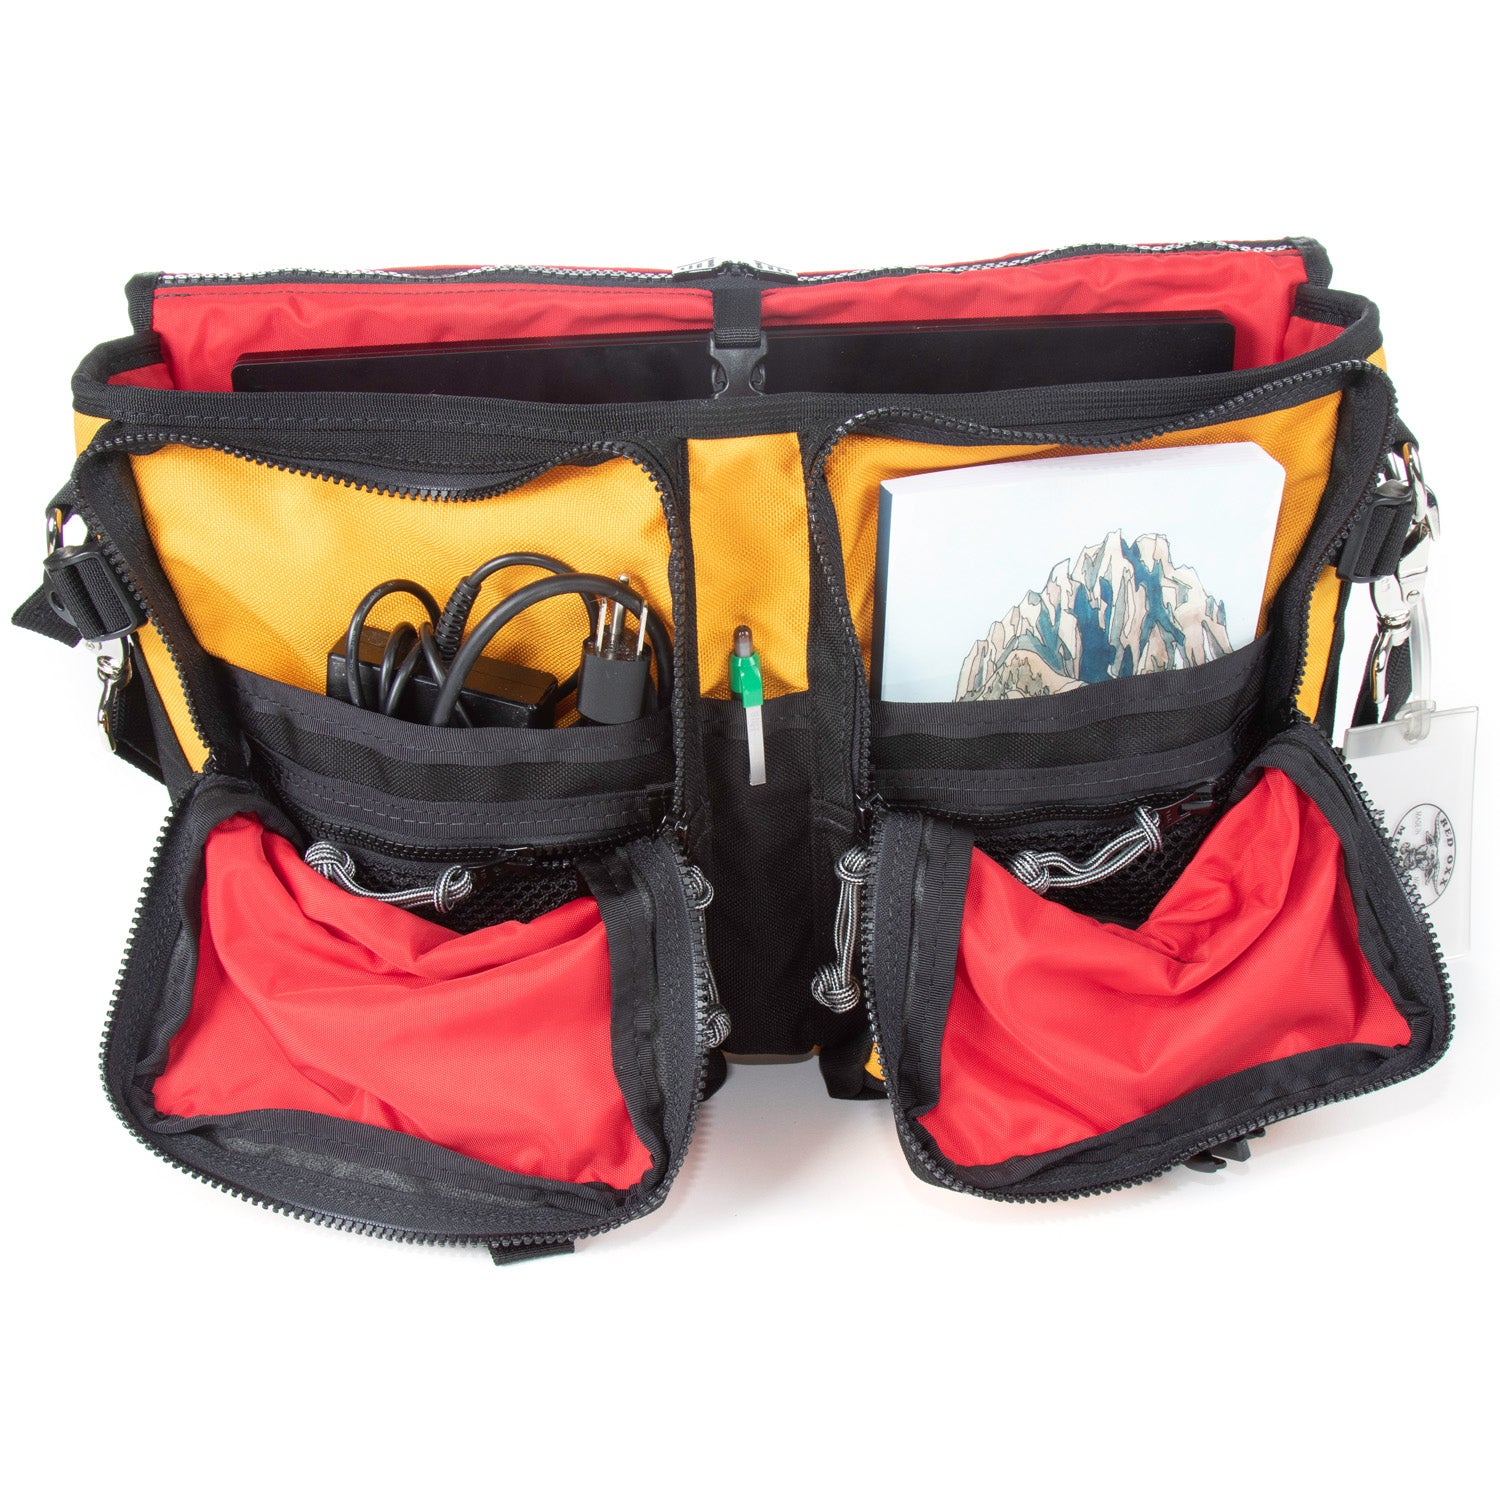 Fully open view of interior pockets and storage options.  Note the Fastex buckle for securing laptop or tablet. 